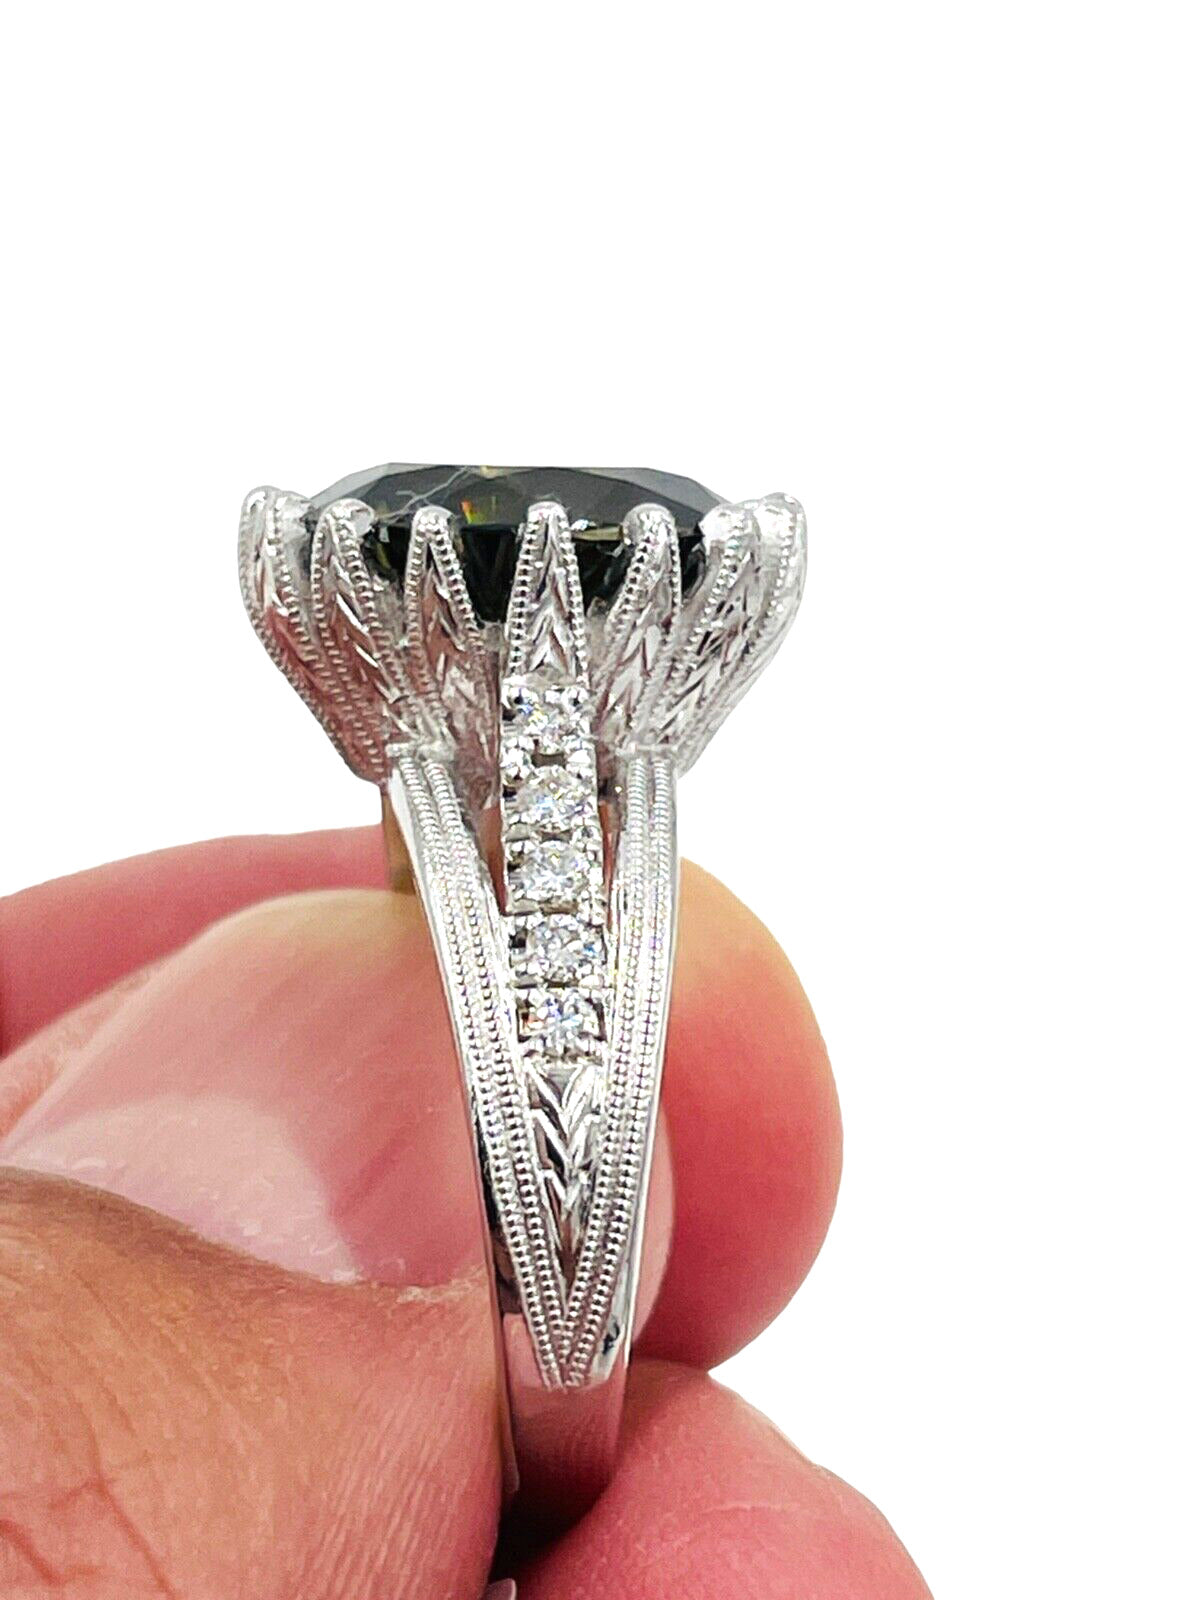 Stunning 8.20cts Natural Zircon and Diamond Cocktail Ring 14k White Gold